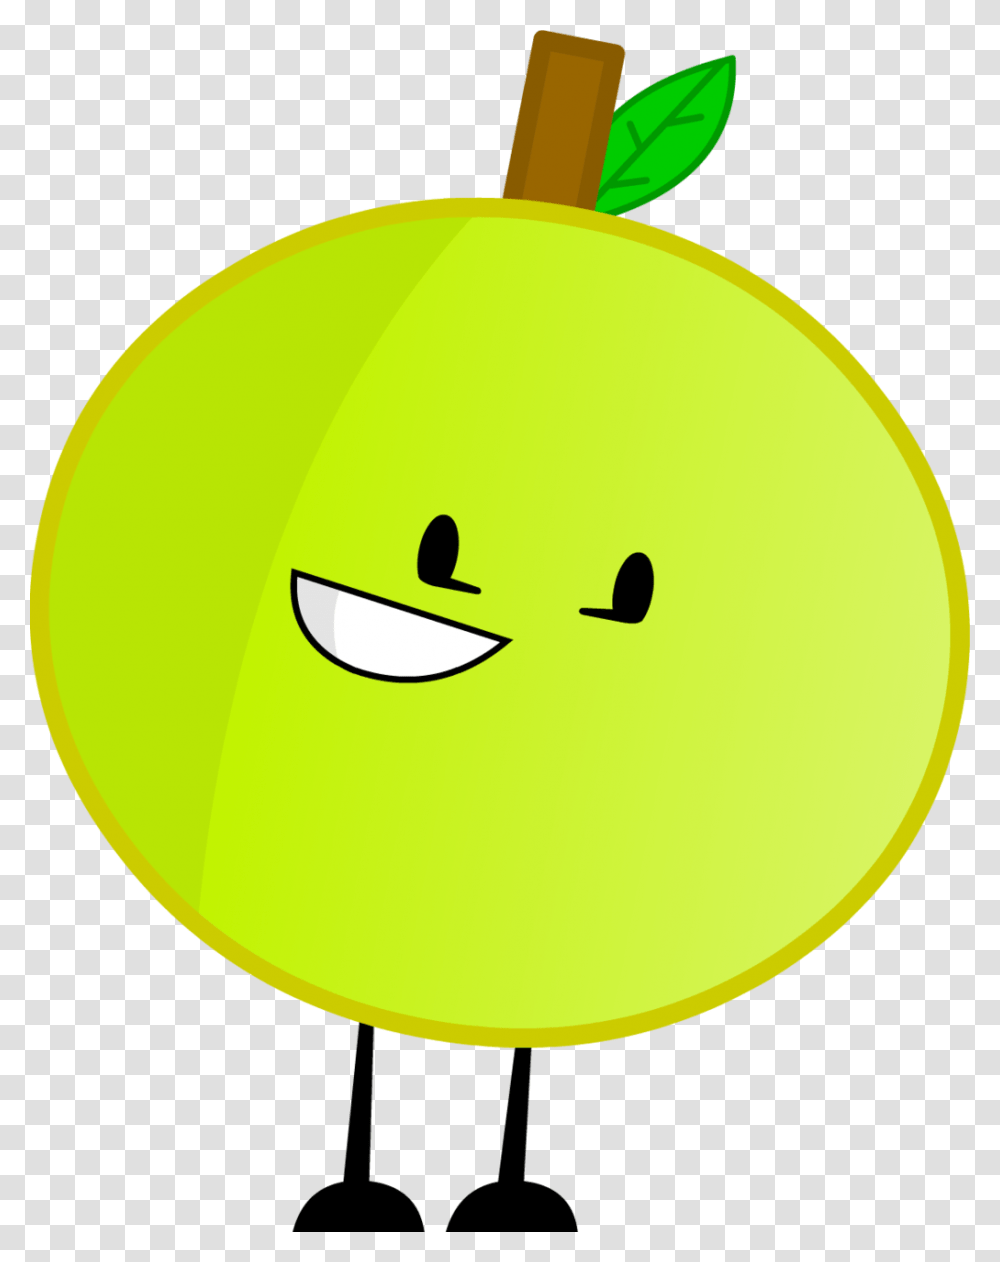 Object Invasion Grapefruit Download Bfdi Grapefruit, Tennis Ball, Sport, Sports, Angry Birds Transparent Png